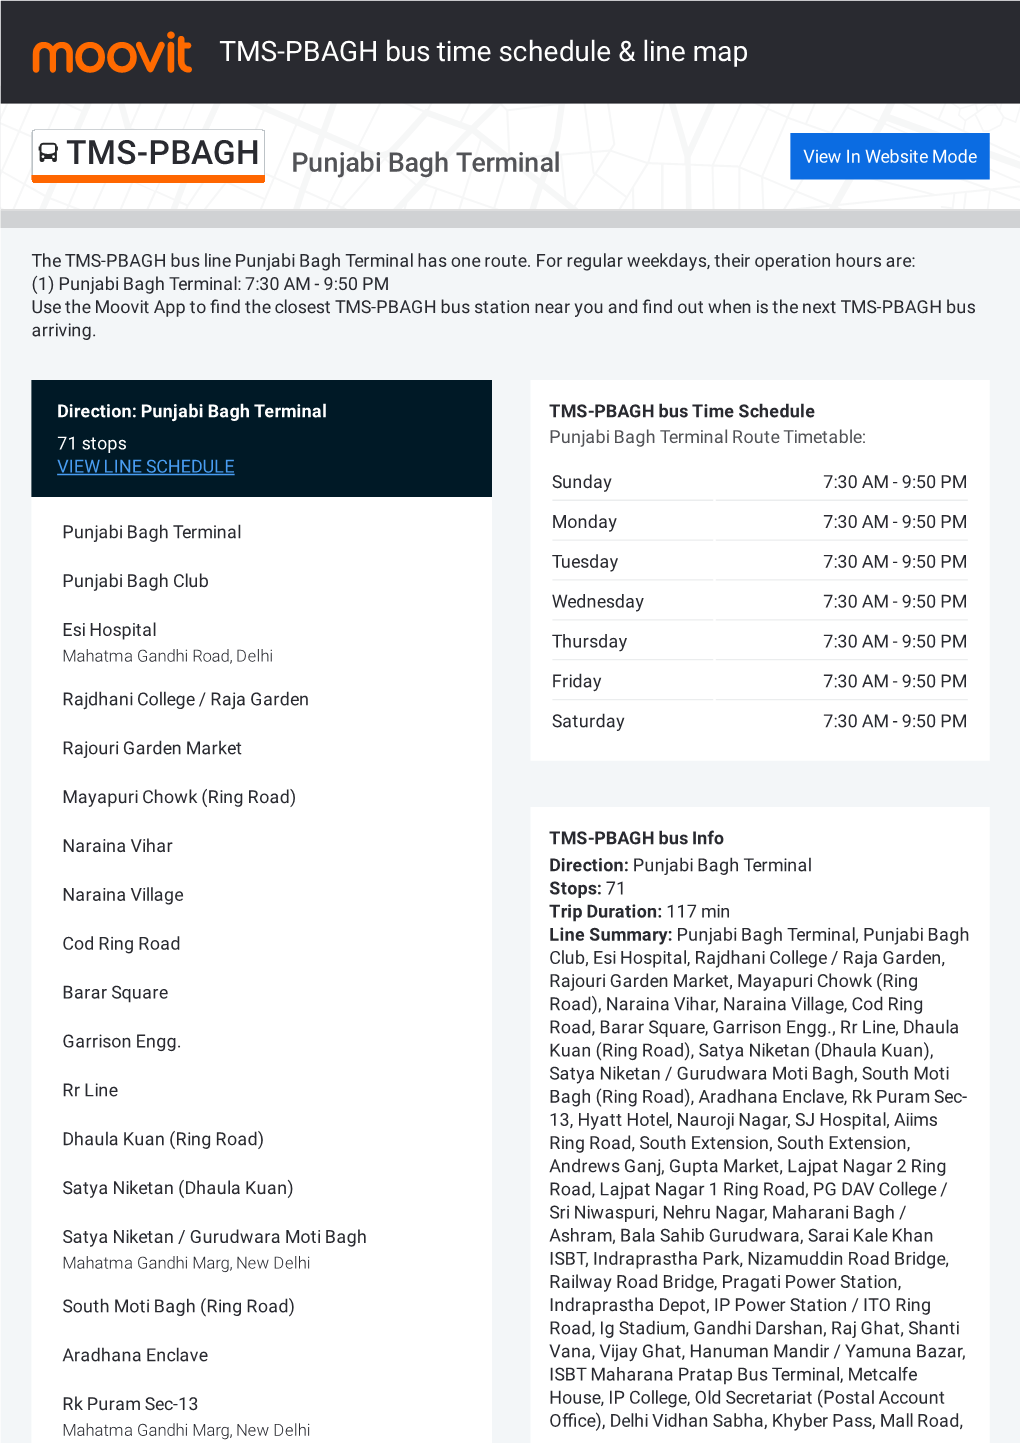 TMS-PBAGH Bus Time Schedule & Line Route